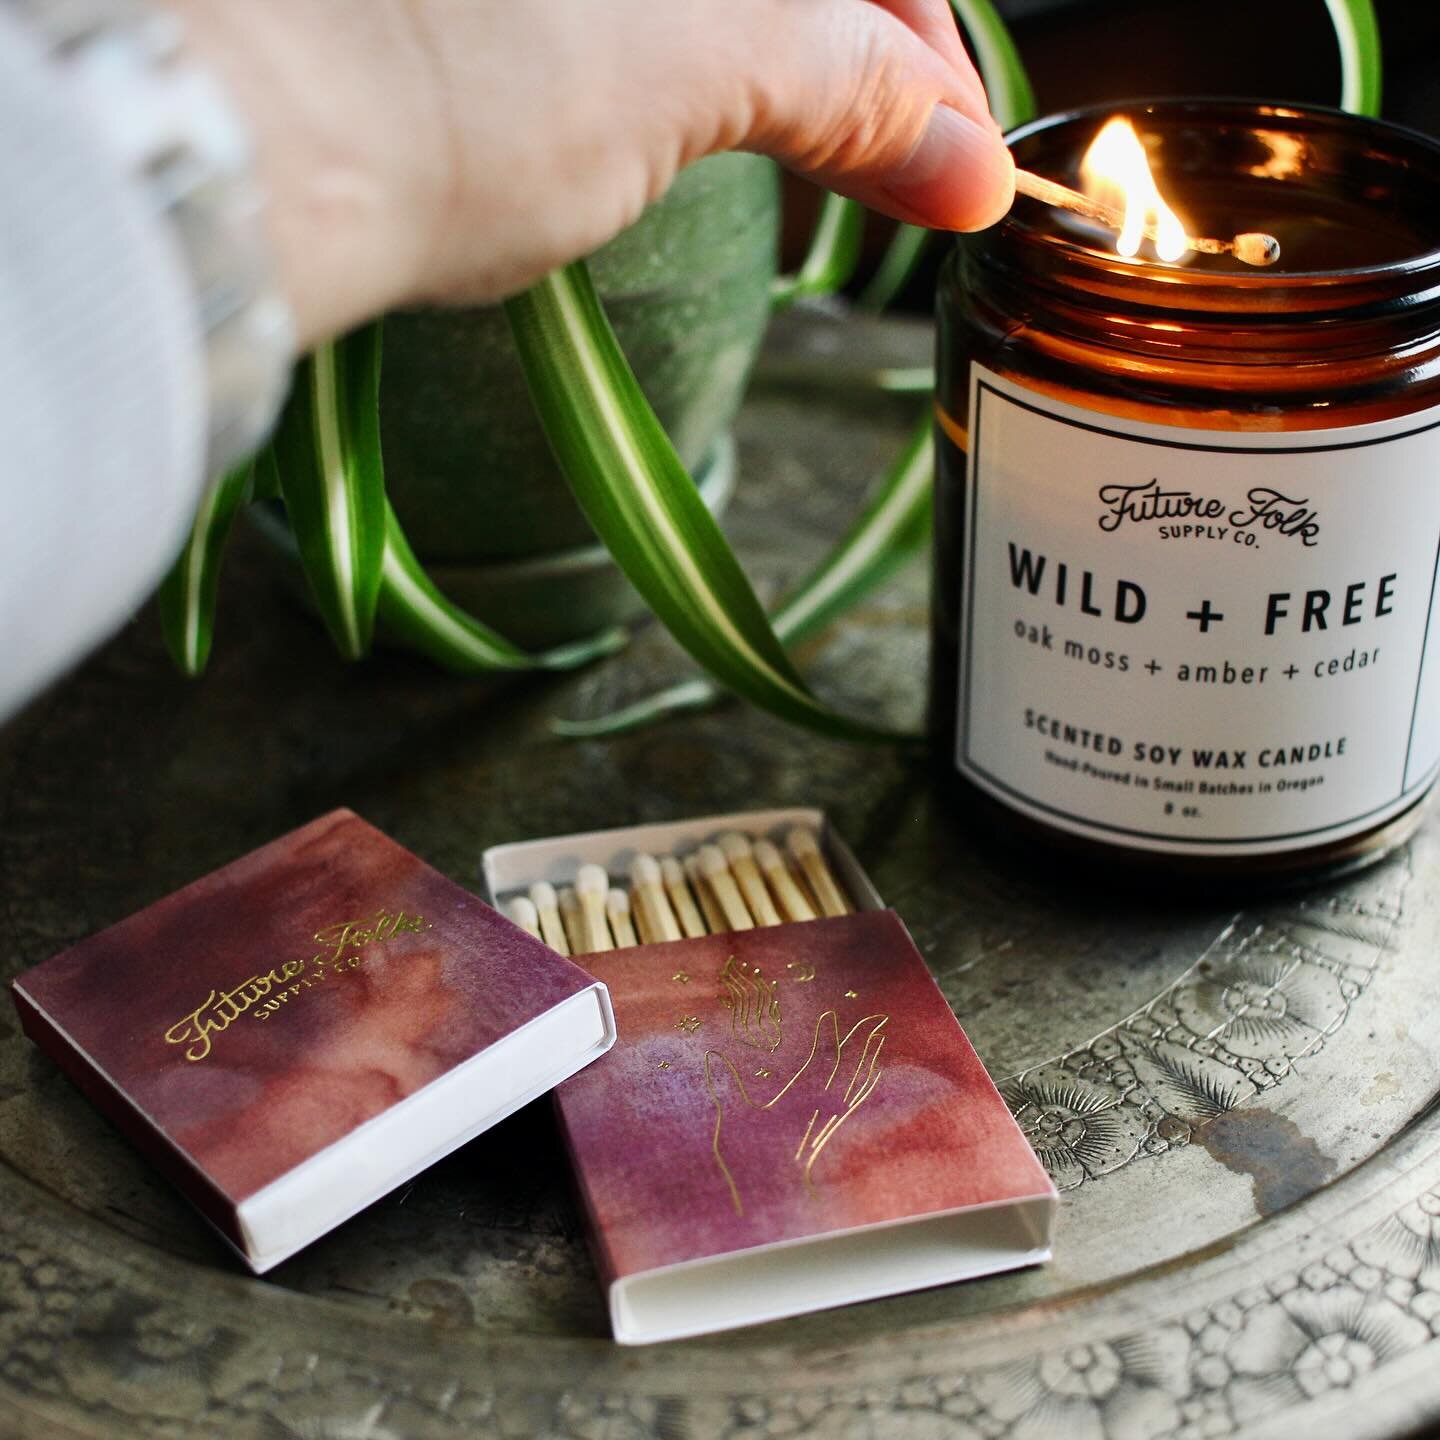 In honor of love and the many ways we share it, we&rsquo;re offering 20% off on all candles + vibe sprays until Valentine&rsquo;s Day. 

Get the love flowing with yummy scents to connect you to all the memories you&rsquo;ve made with friends + lovers